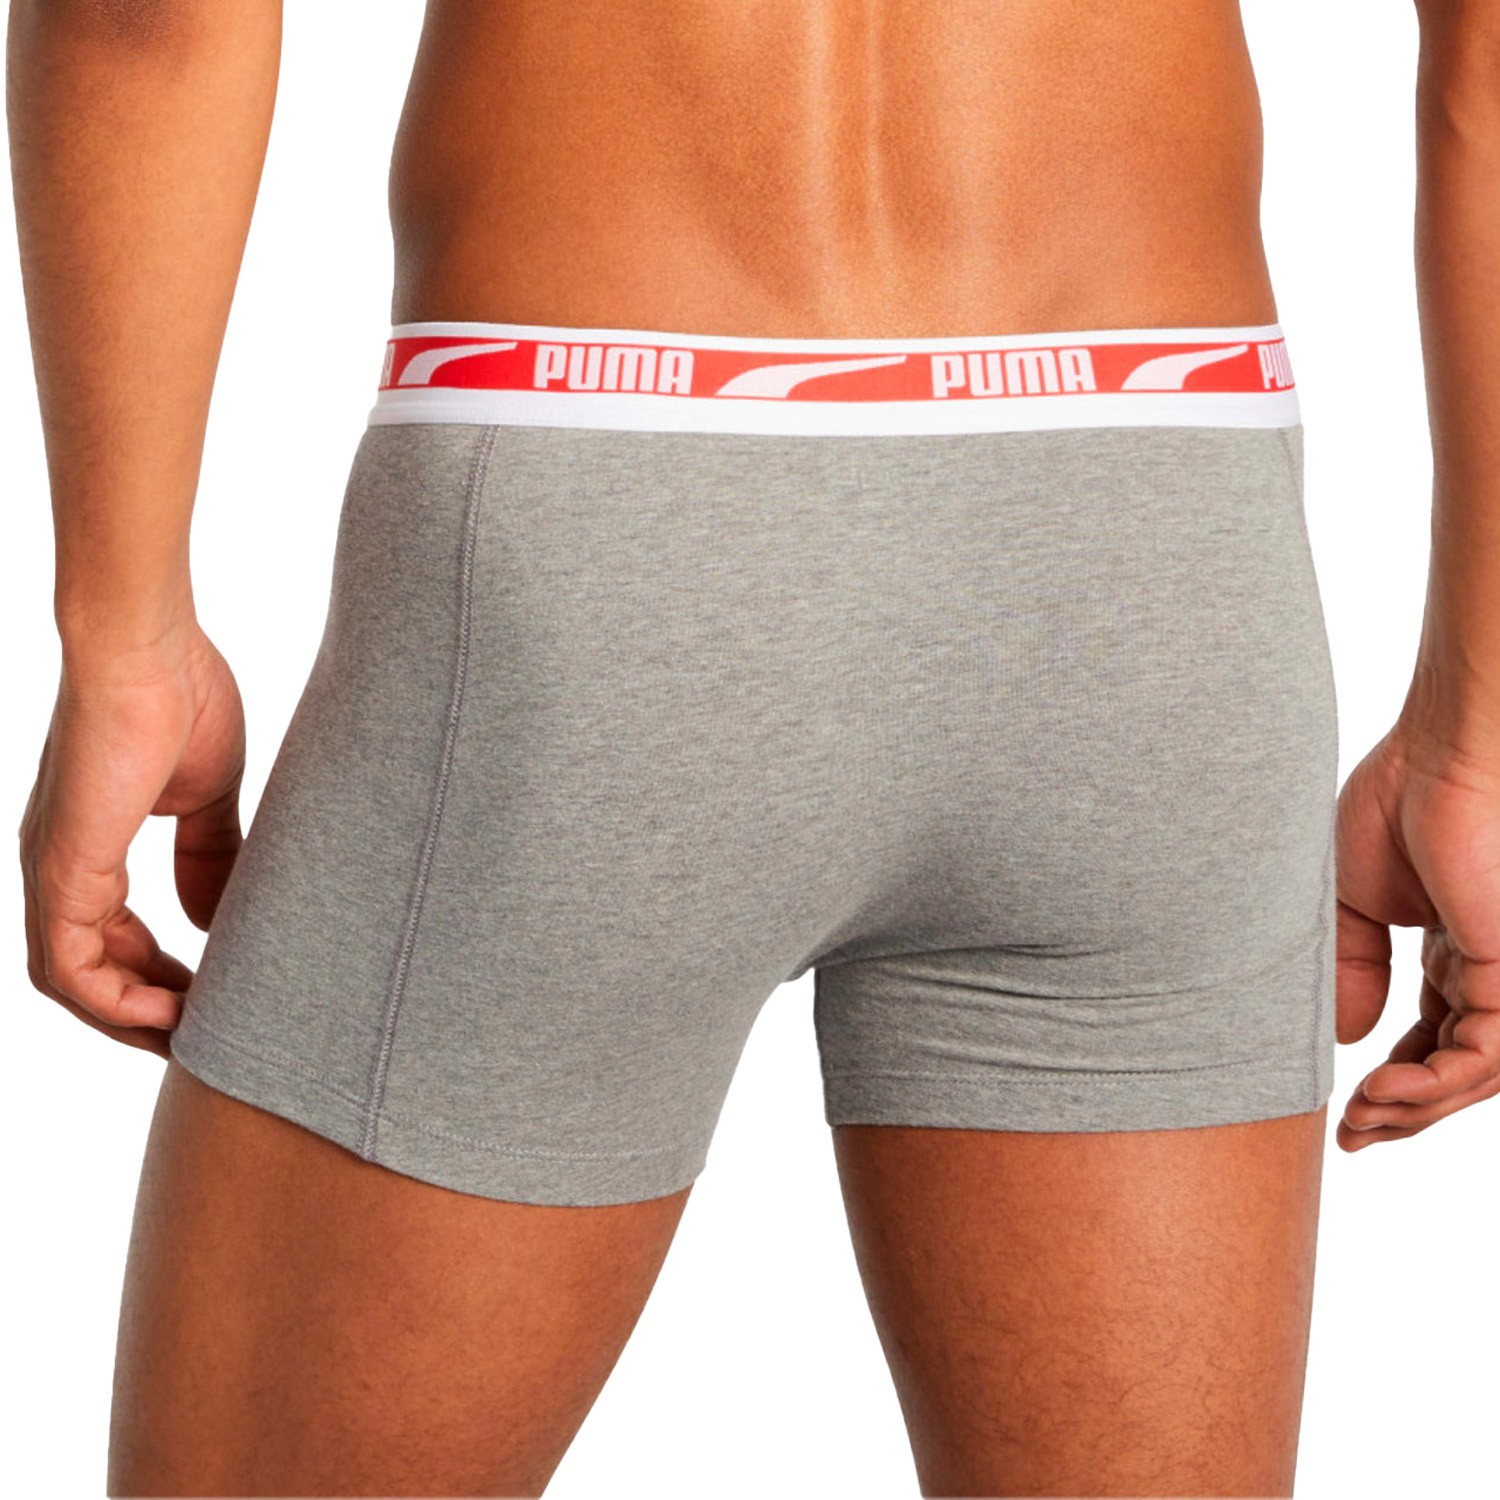 Set of 2 boxers Multi logo PUMA - grey and red: Packs for man